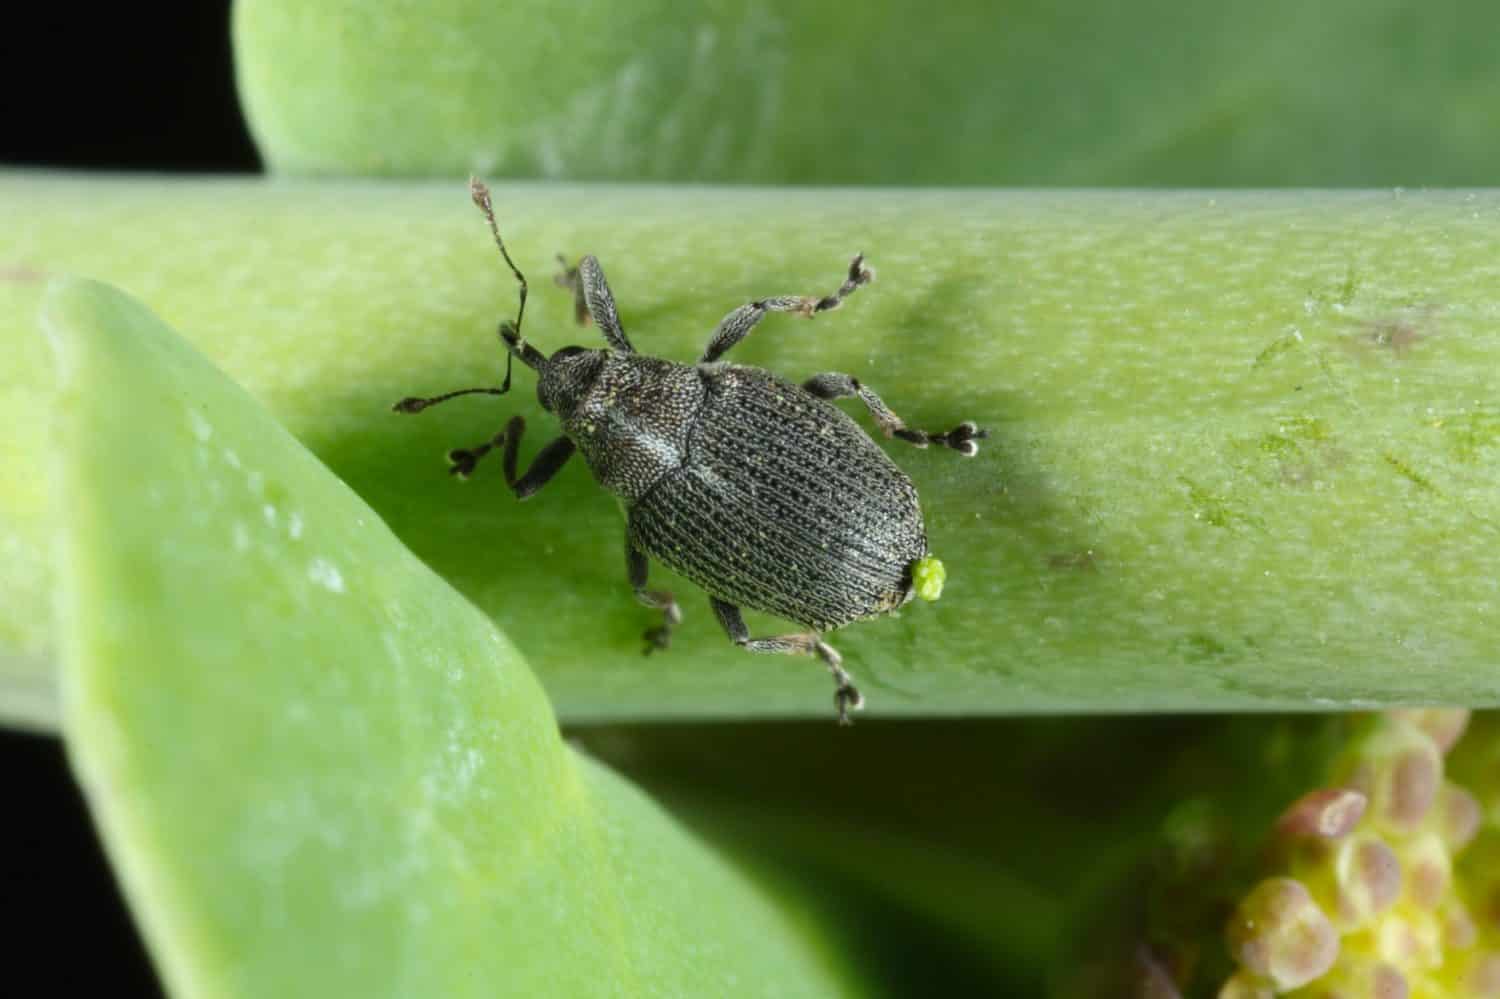 The cabbage seed pod weevil, Ceutorhynchus obstrictus (formerly called assimilis) is beetle from family Curculionidae. This is pest of oilseed rape (canola) plants.